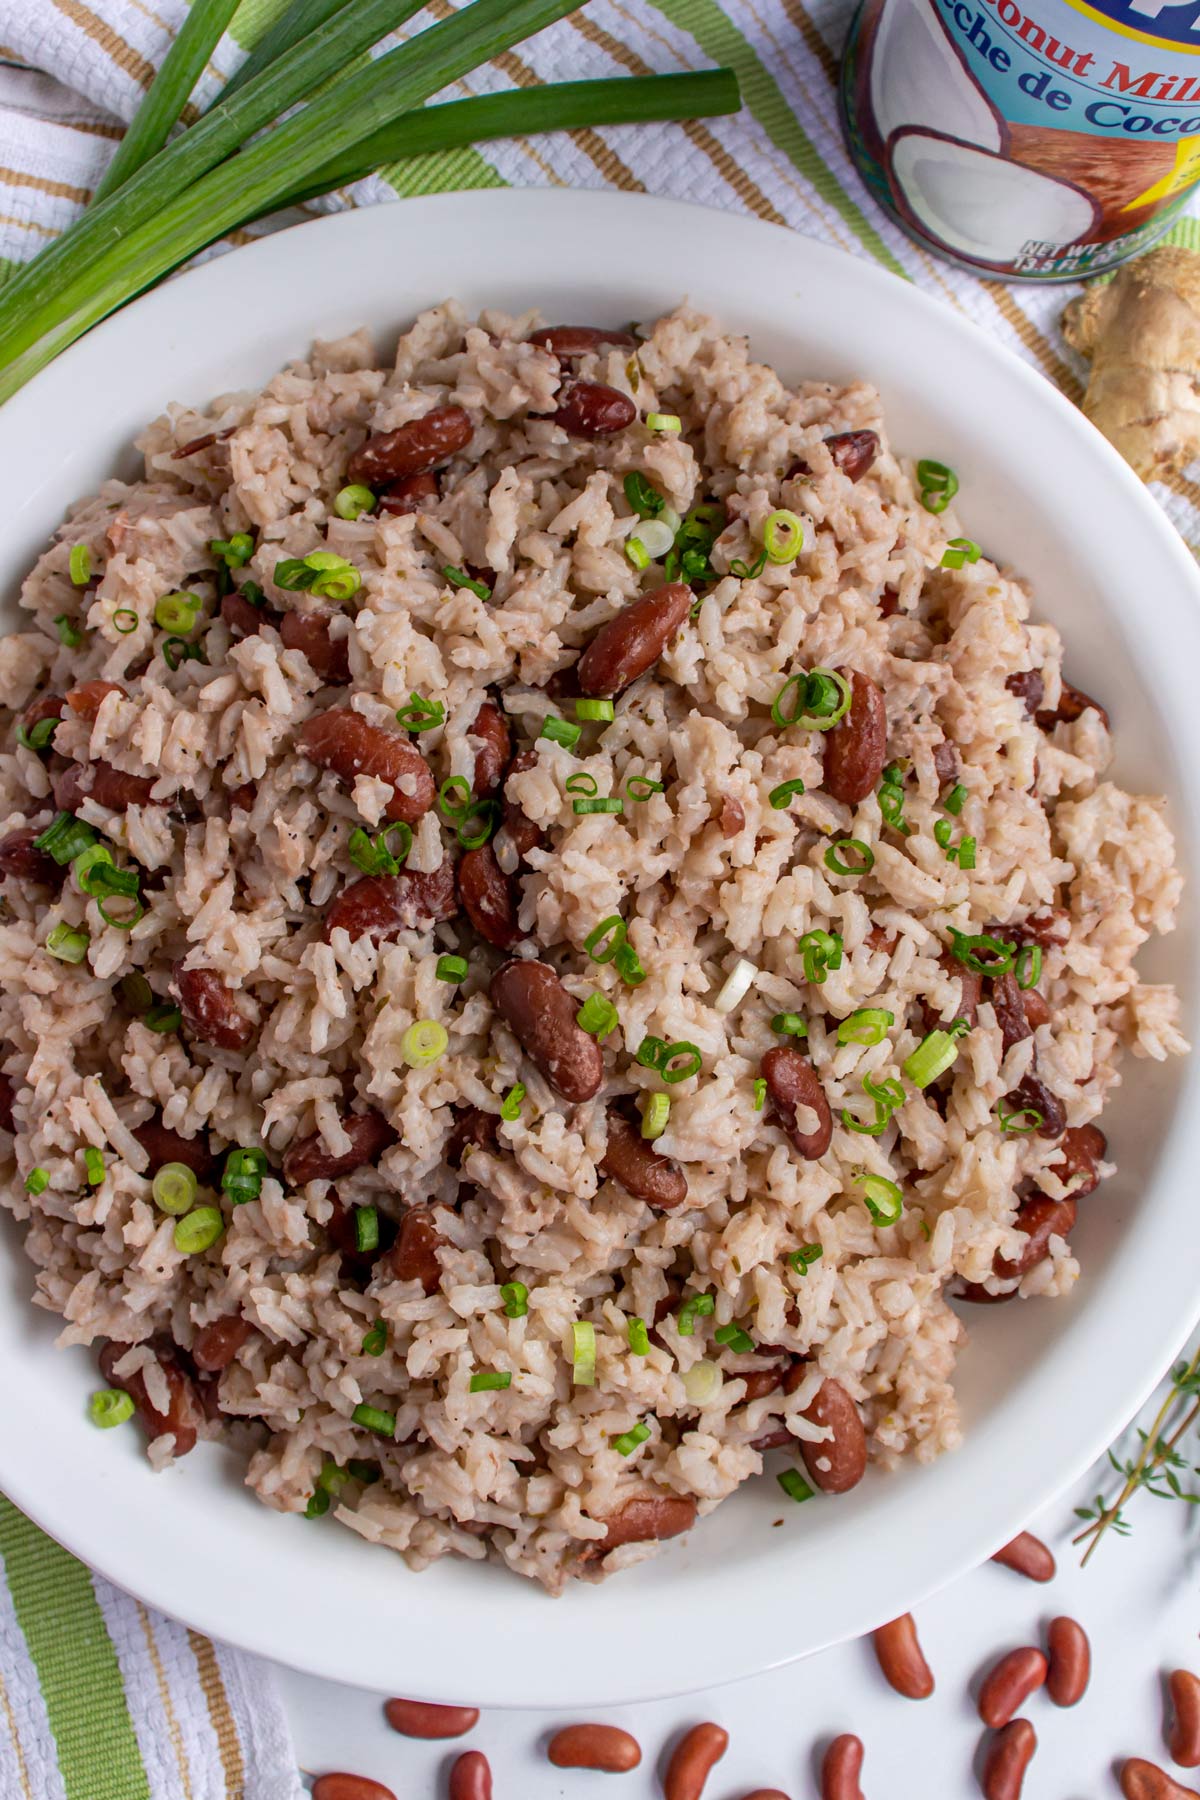 A bowl of rice and peas, scallions, dried kidney beans, and a can of coconut milk.